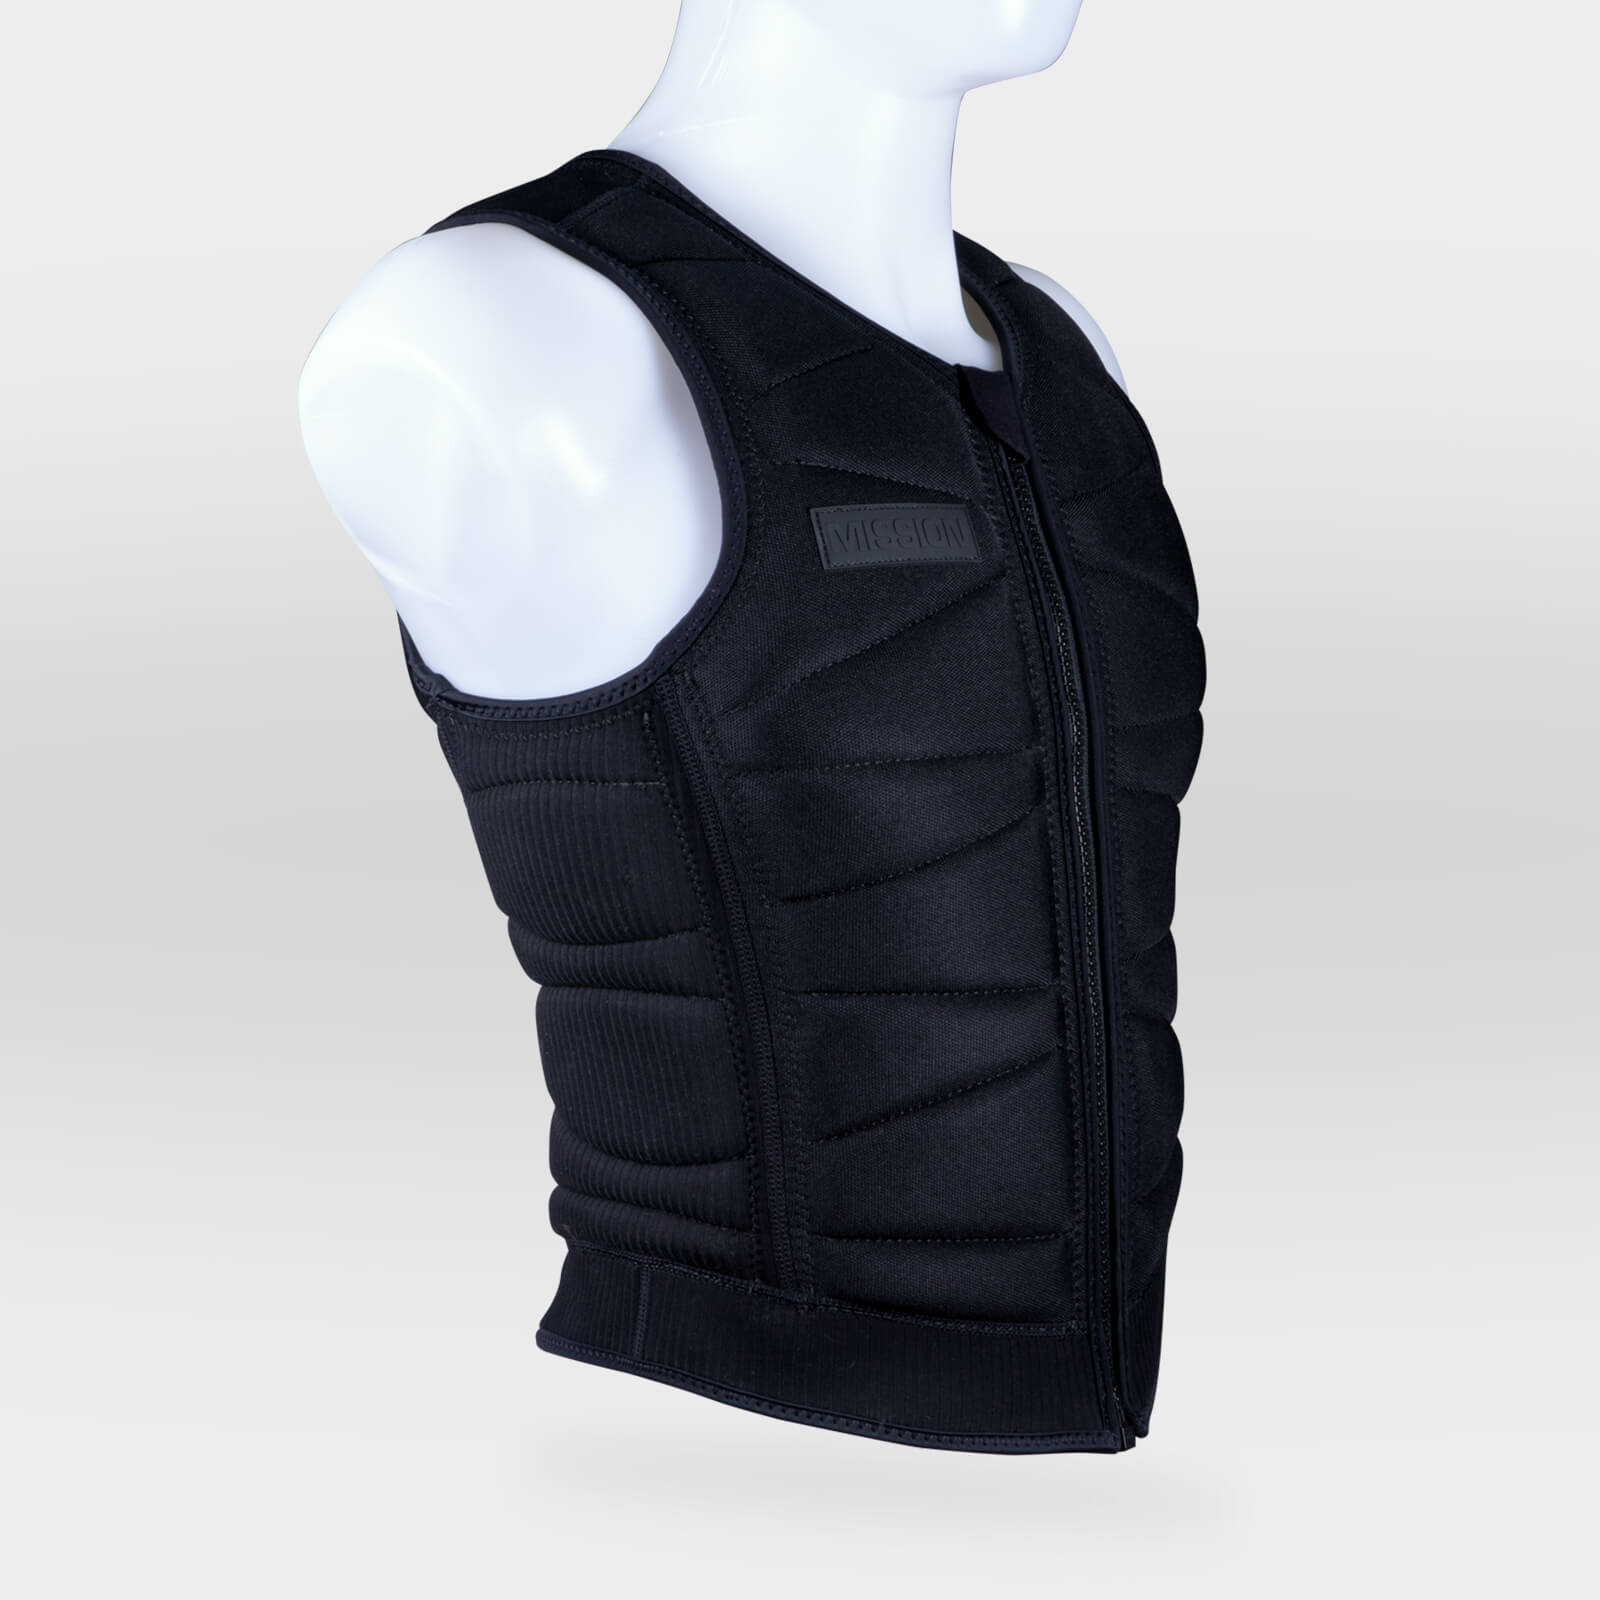 ONDO vest blacked out side